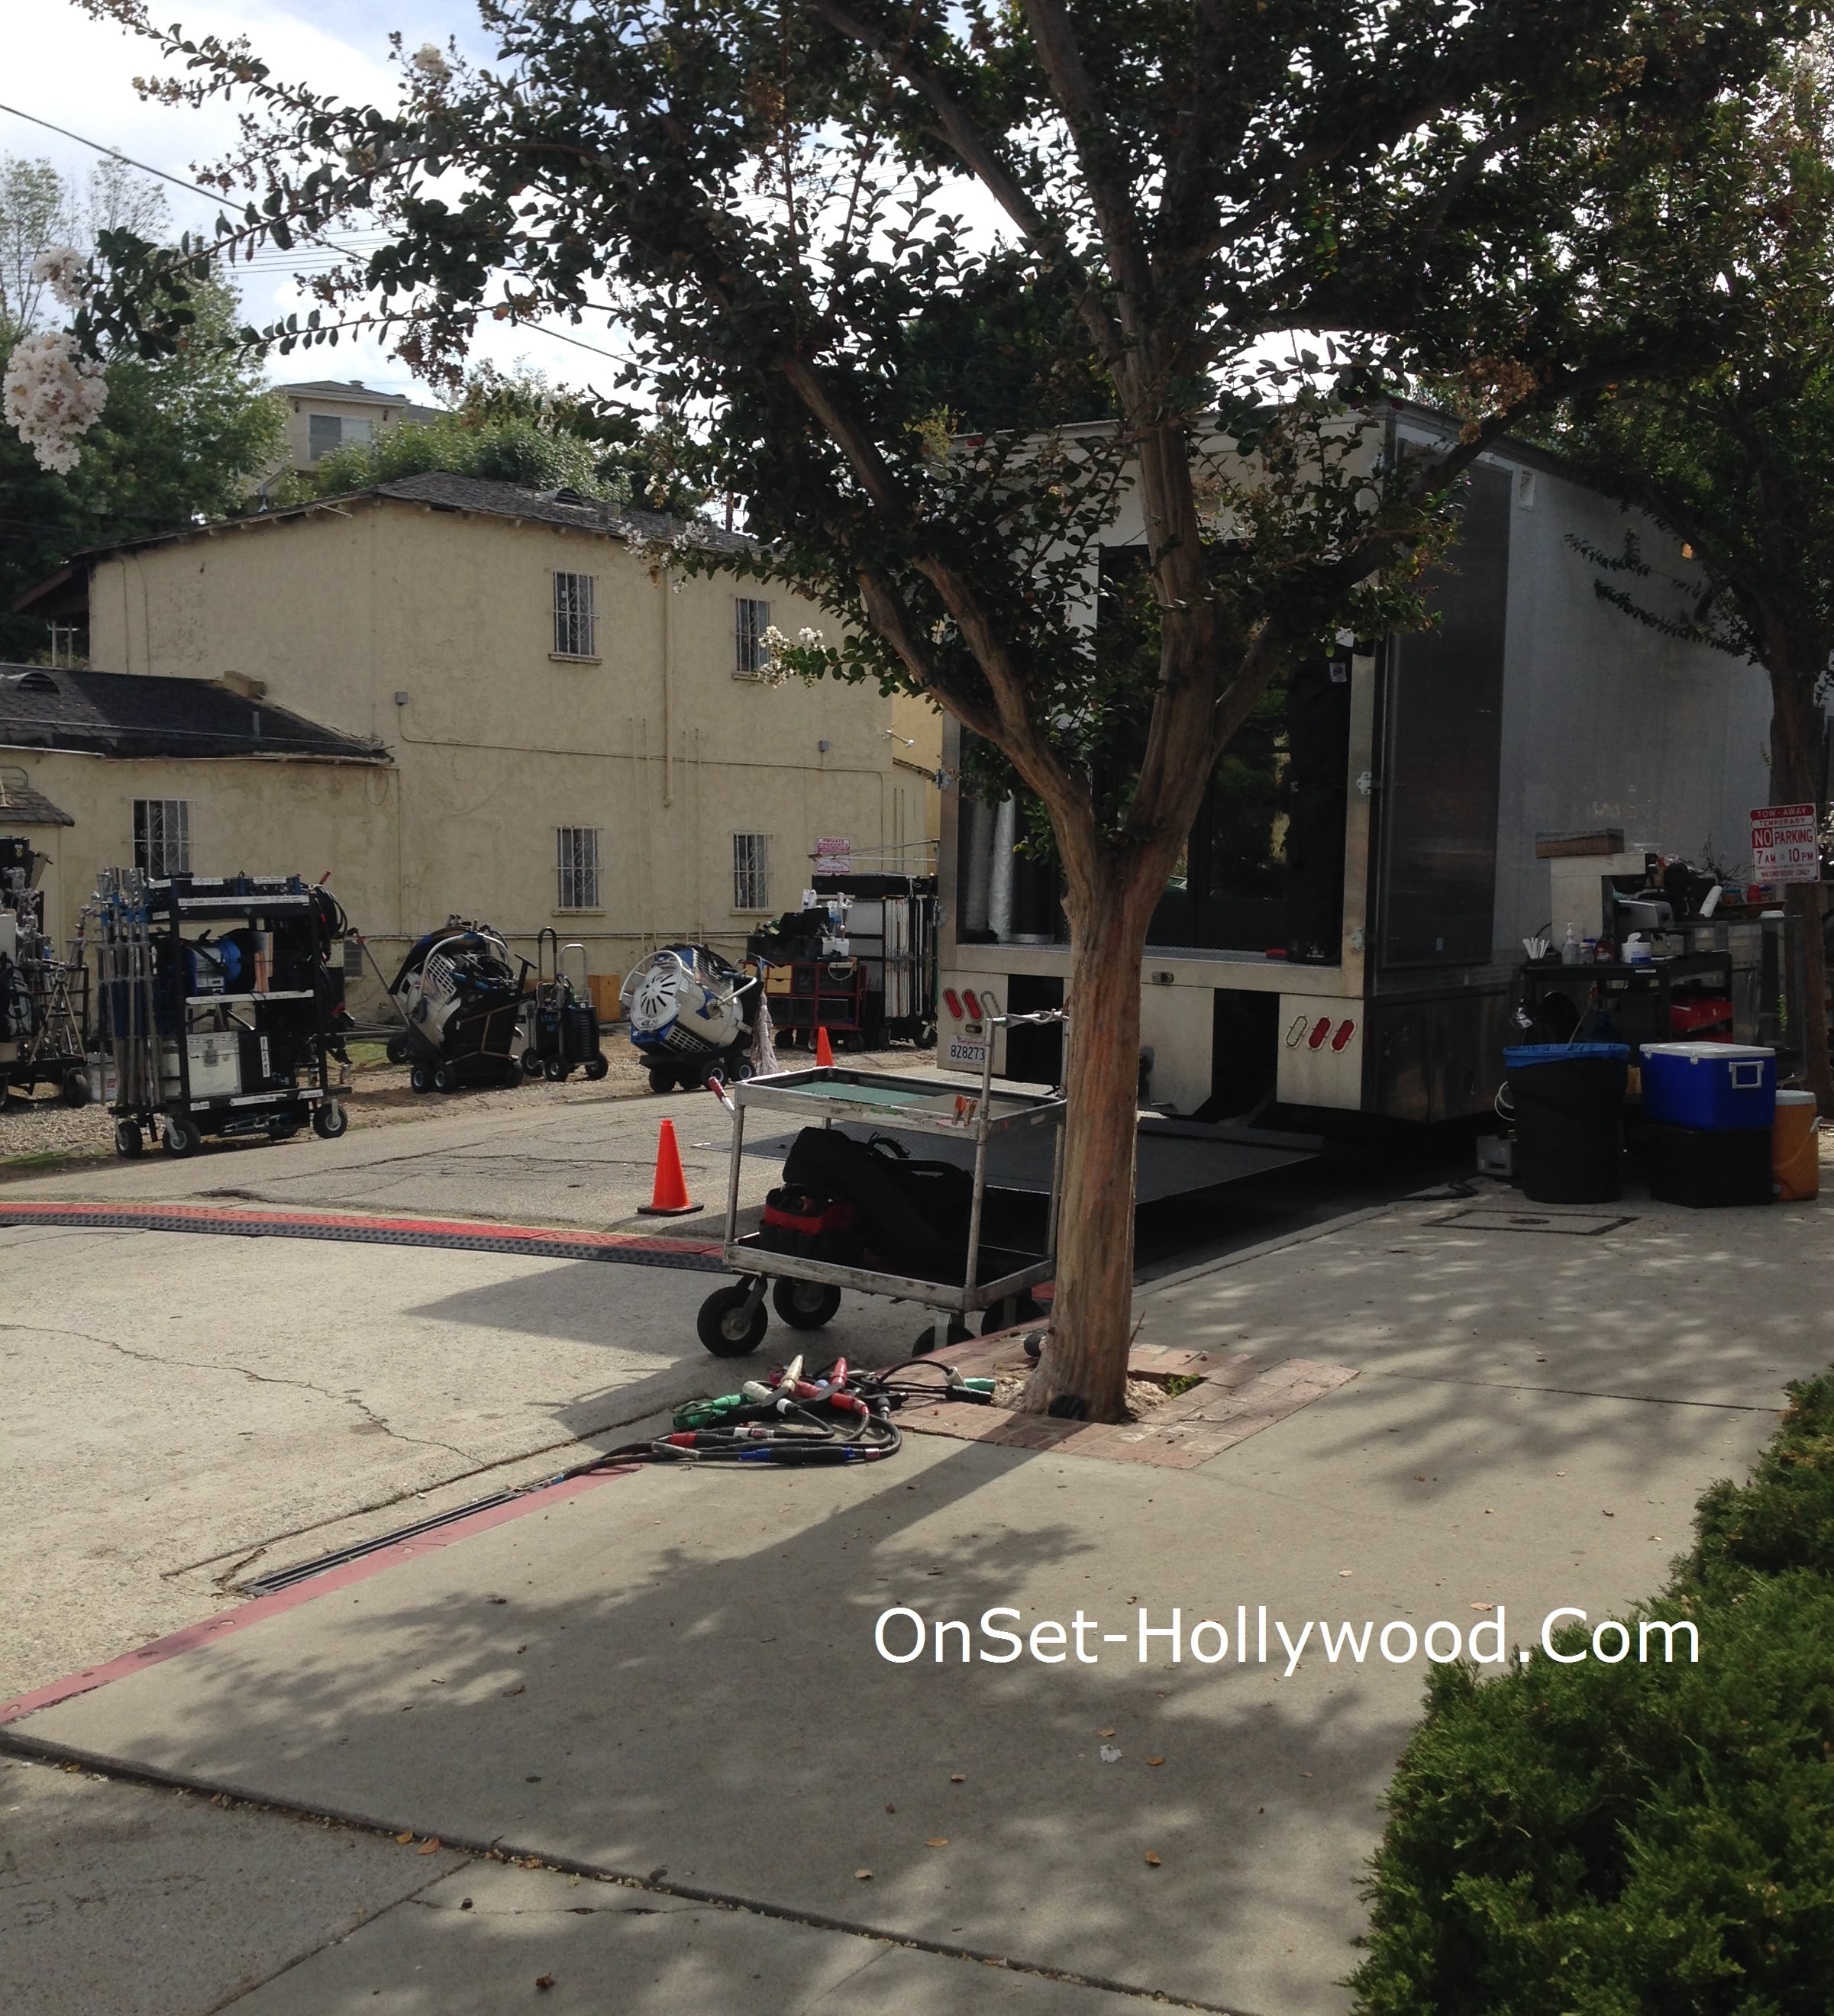 rush-hour-tv-series-filming-locations-universal-city-pic4